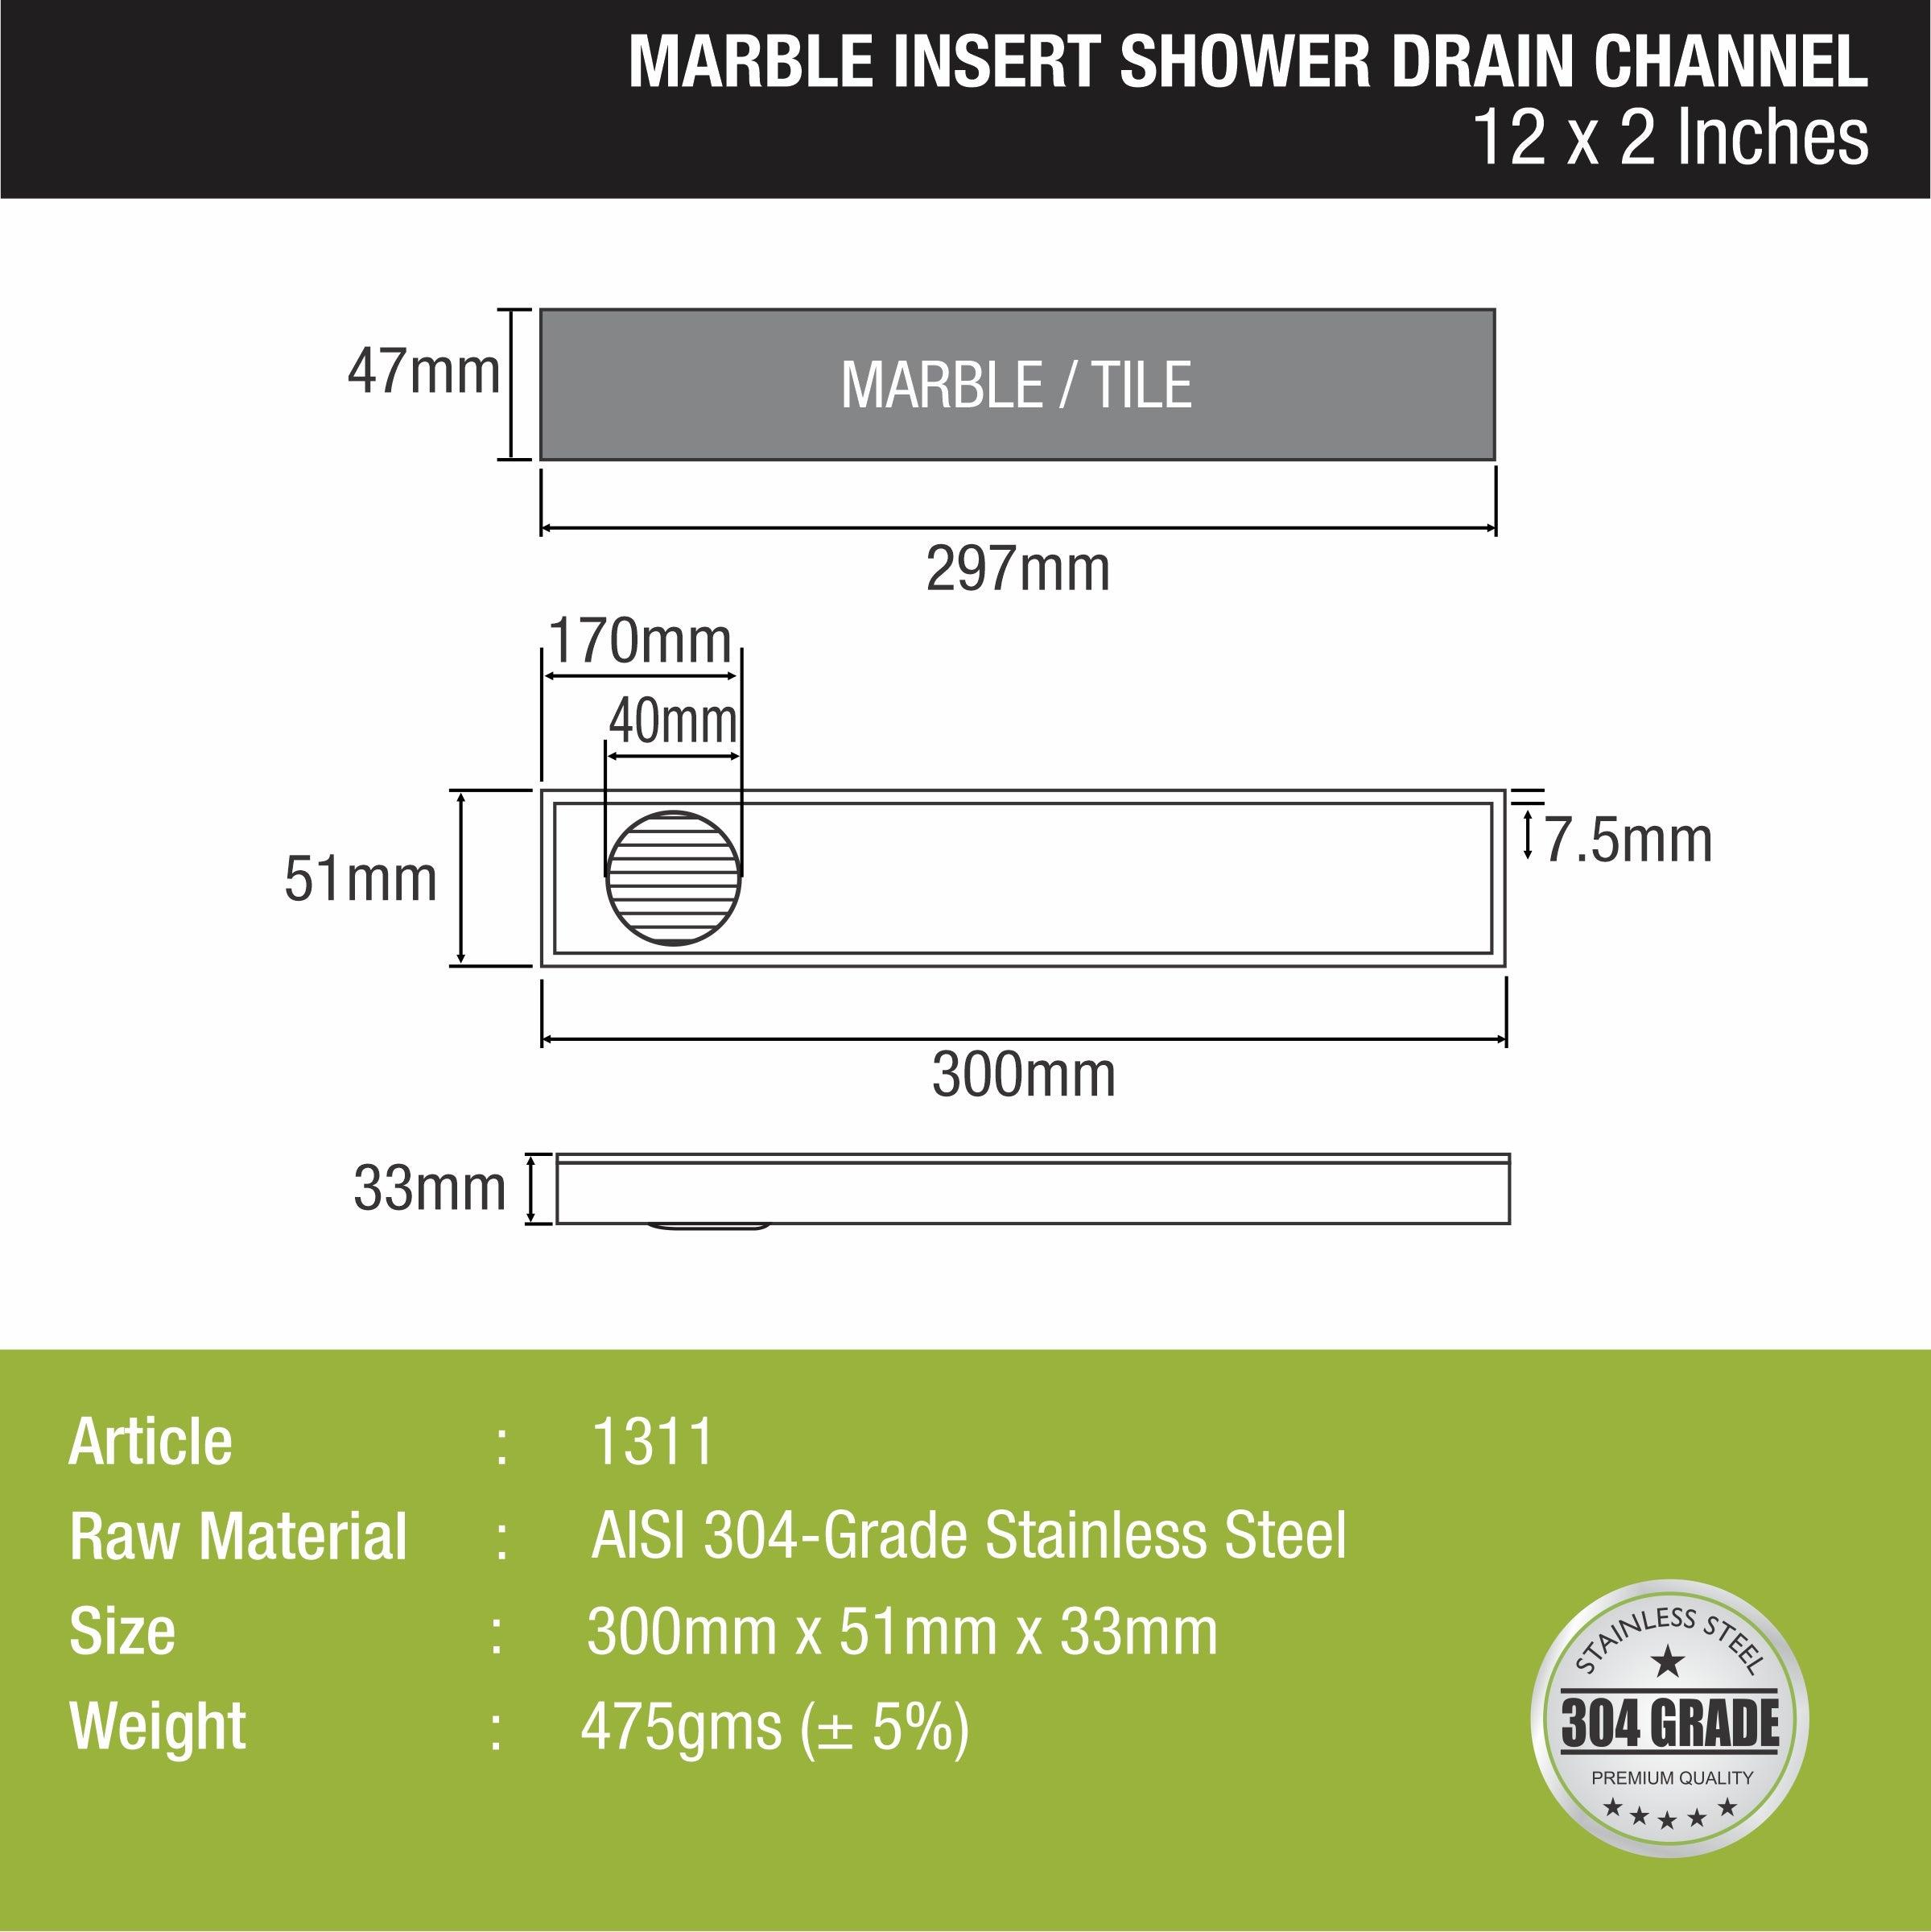 Marble Insert Shower Drain Channel (12 x 2 Inches) sizes and dimensions